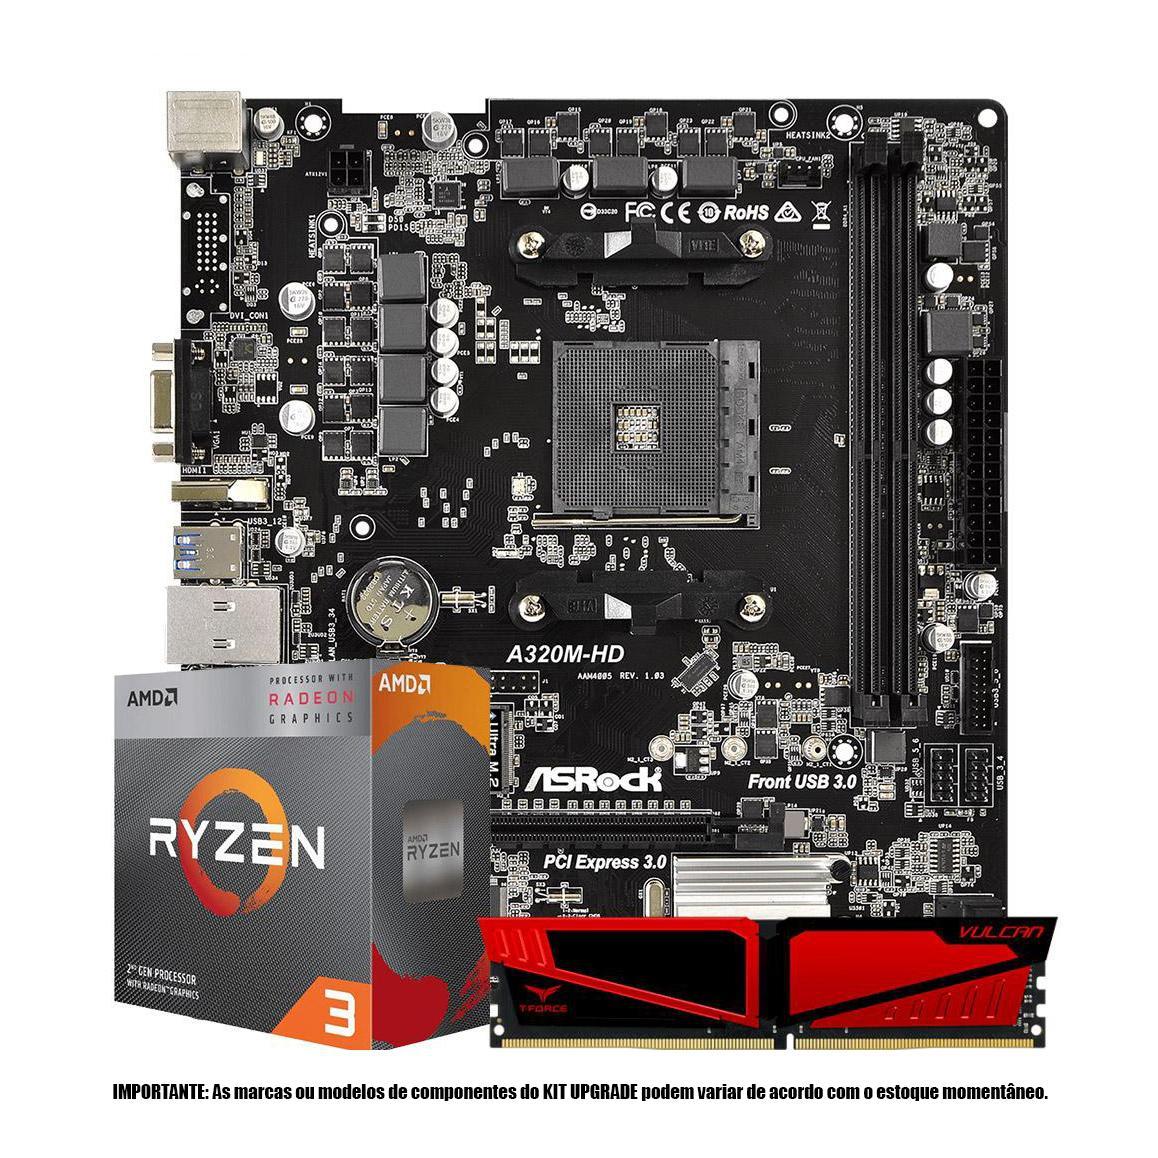 Amd Ryzen 3 3200G / Innovation PC;Kit tuning PC;AMD Ryzen 3;AMD Ryzen 3 3200G ... - The amd ryzen 3 3200g is a desktop processor with 4 cores, launched in july 2019.